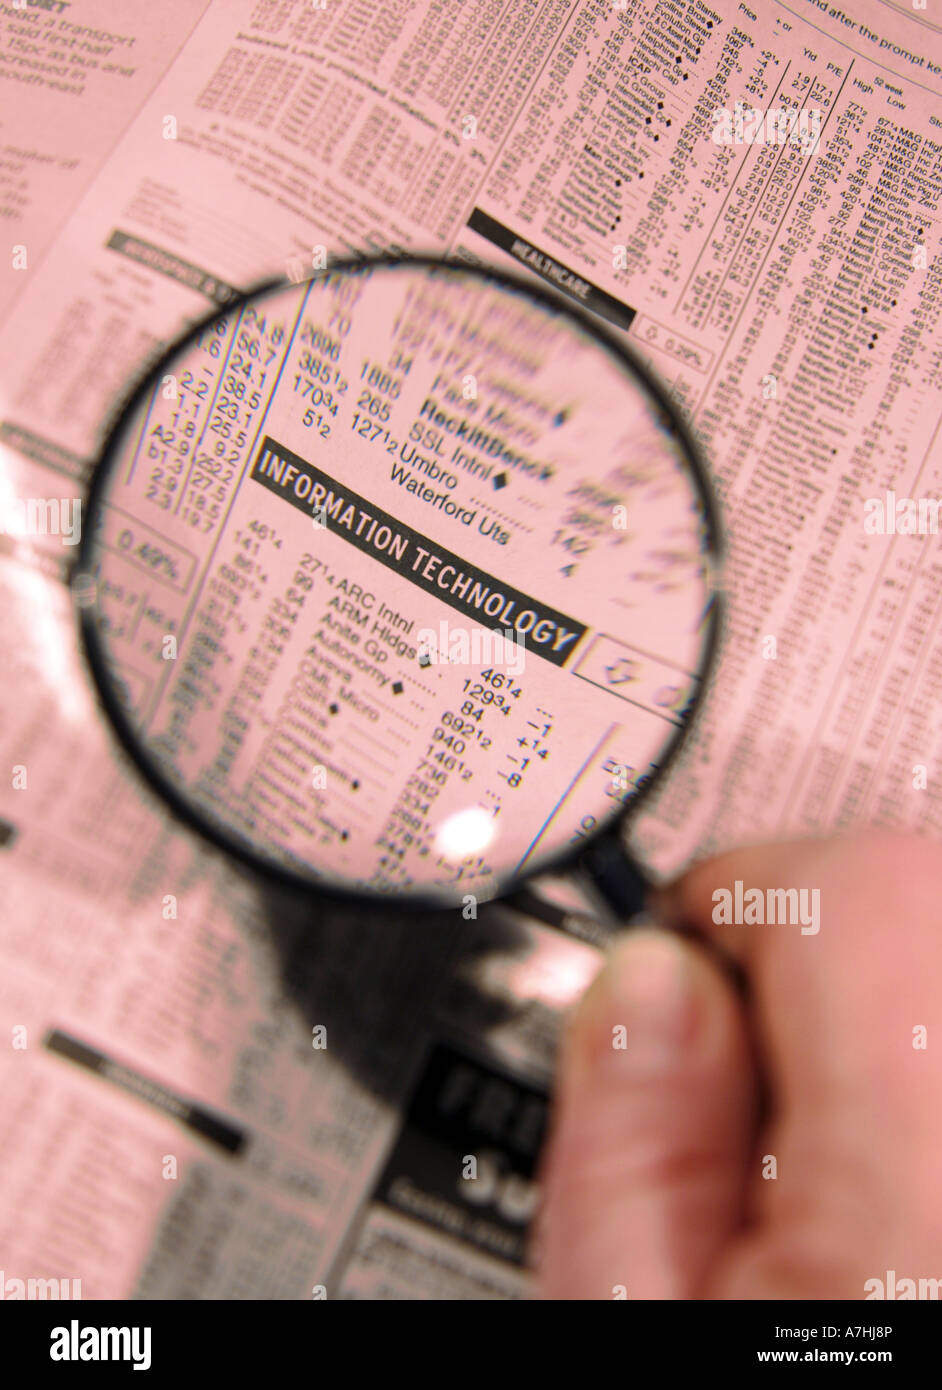 Information Technology Companies Share Prices under a Magnifying Glass Stock Photo